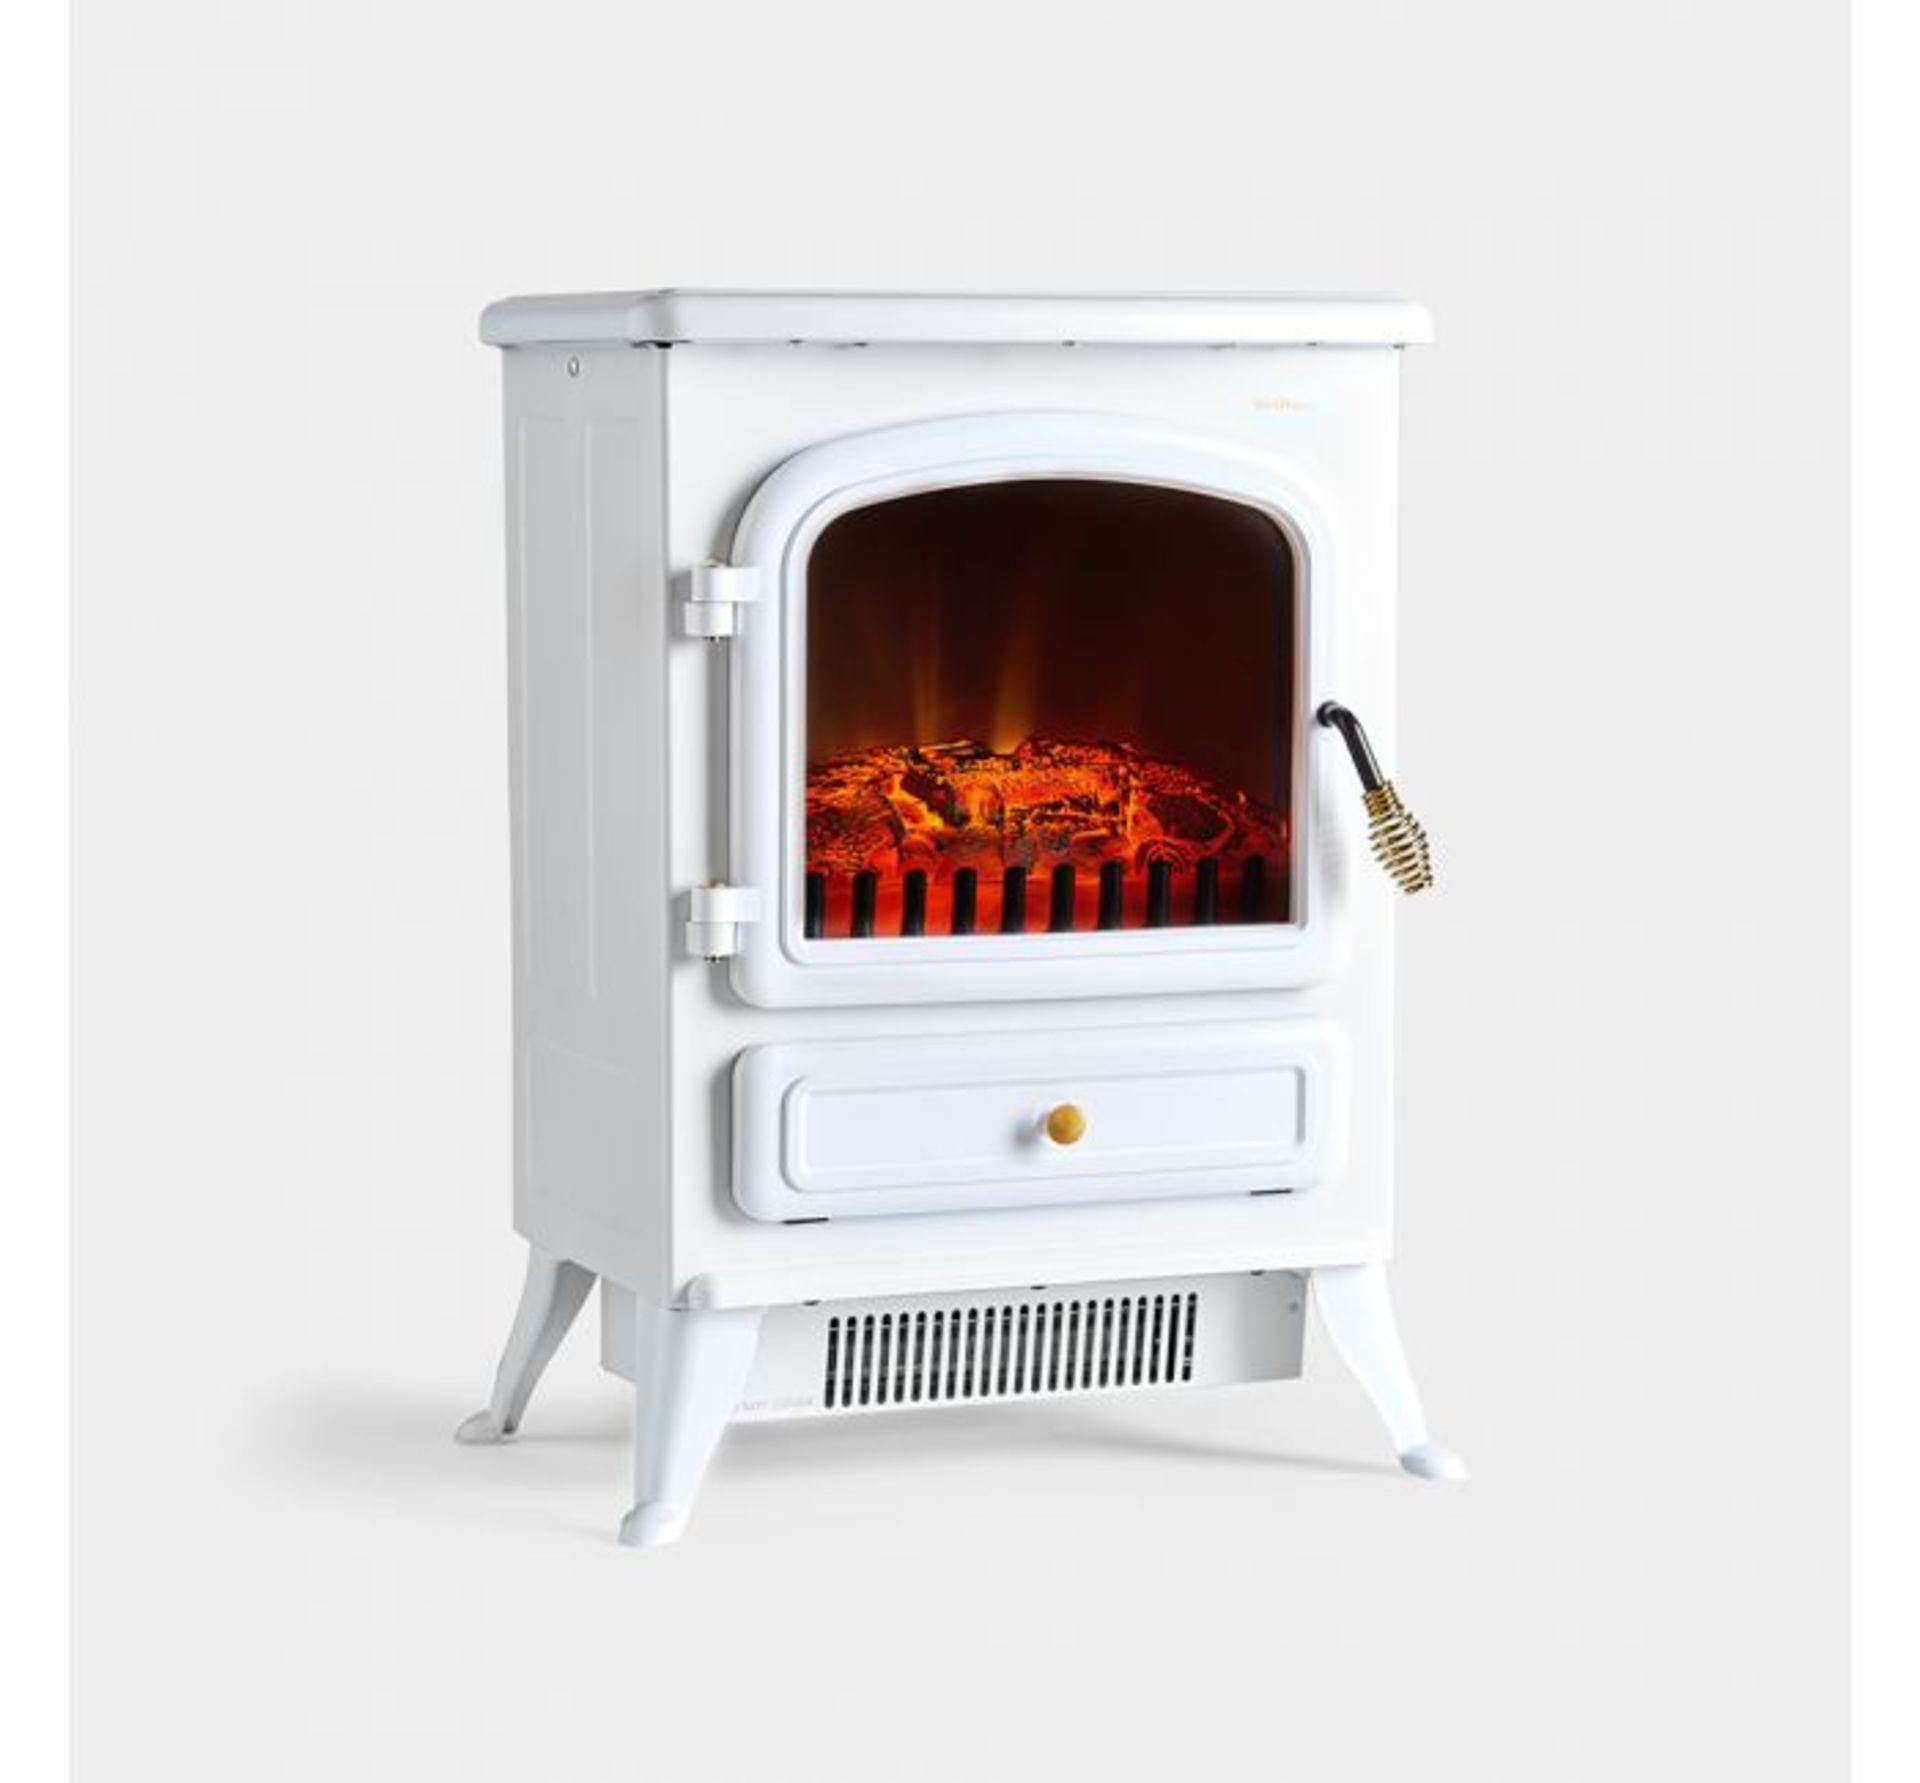 (AP167) 1850W Portable Electric Stove Heater Two heat settings - 925W or 1850W Heats rooms up... - Image 2 of 2